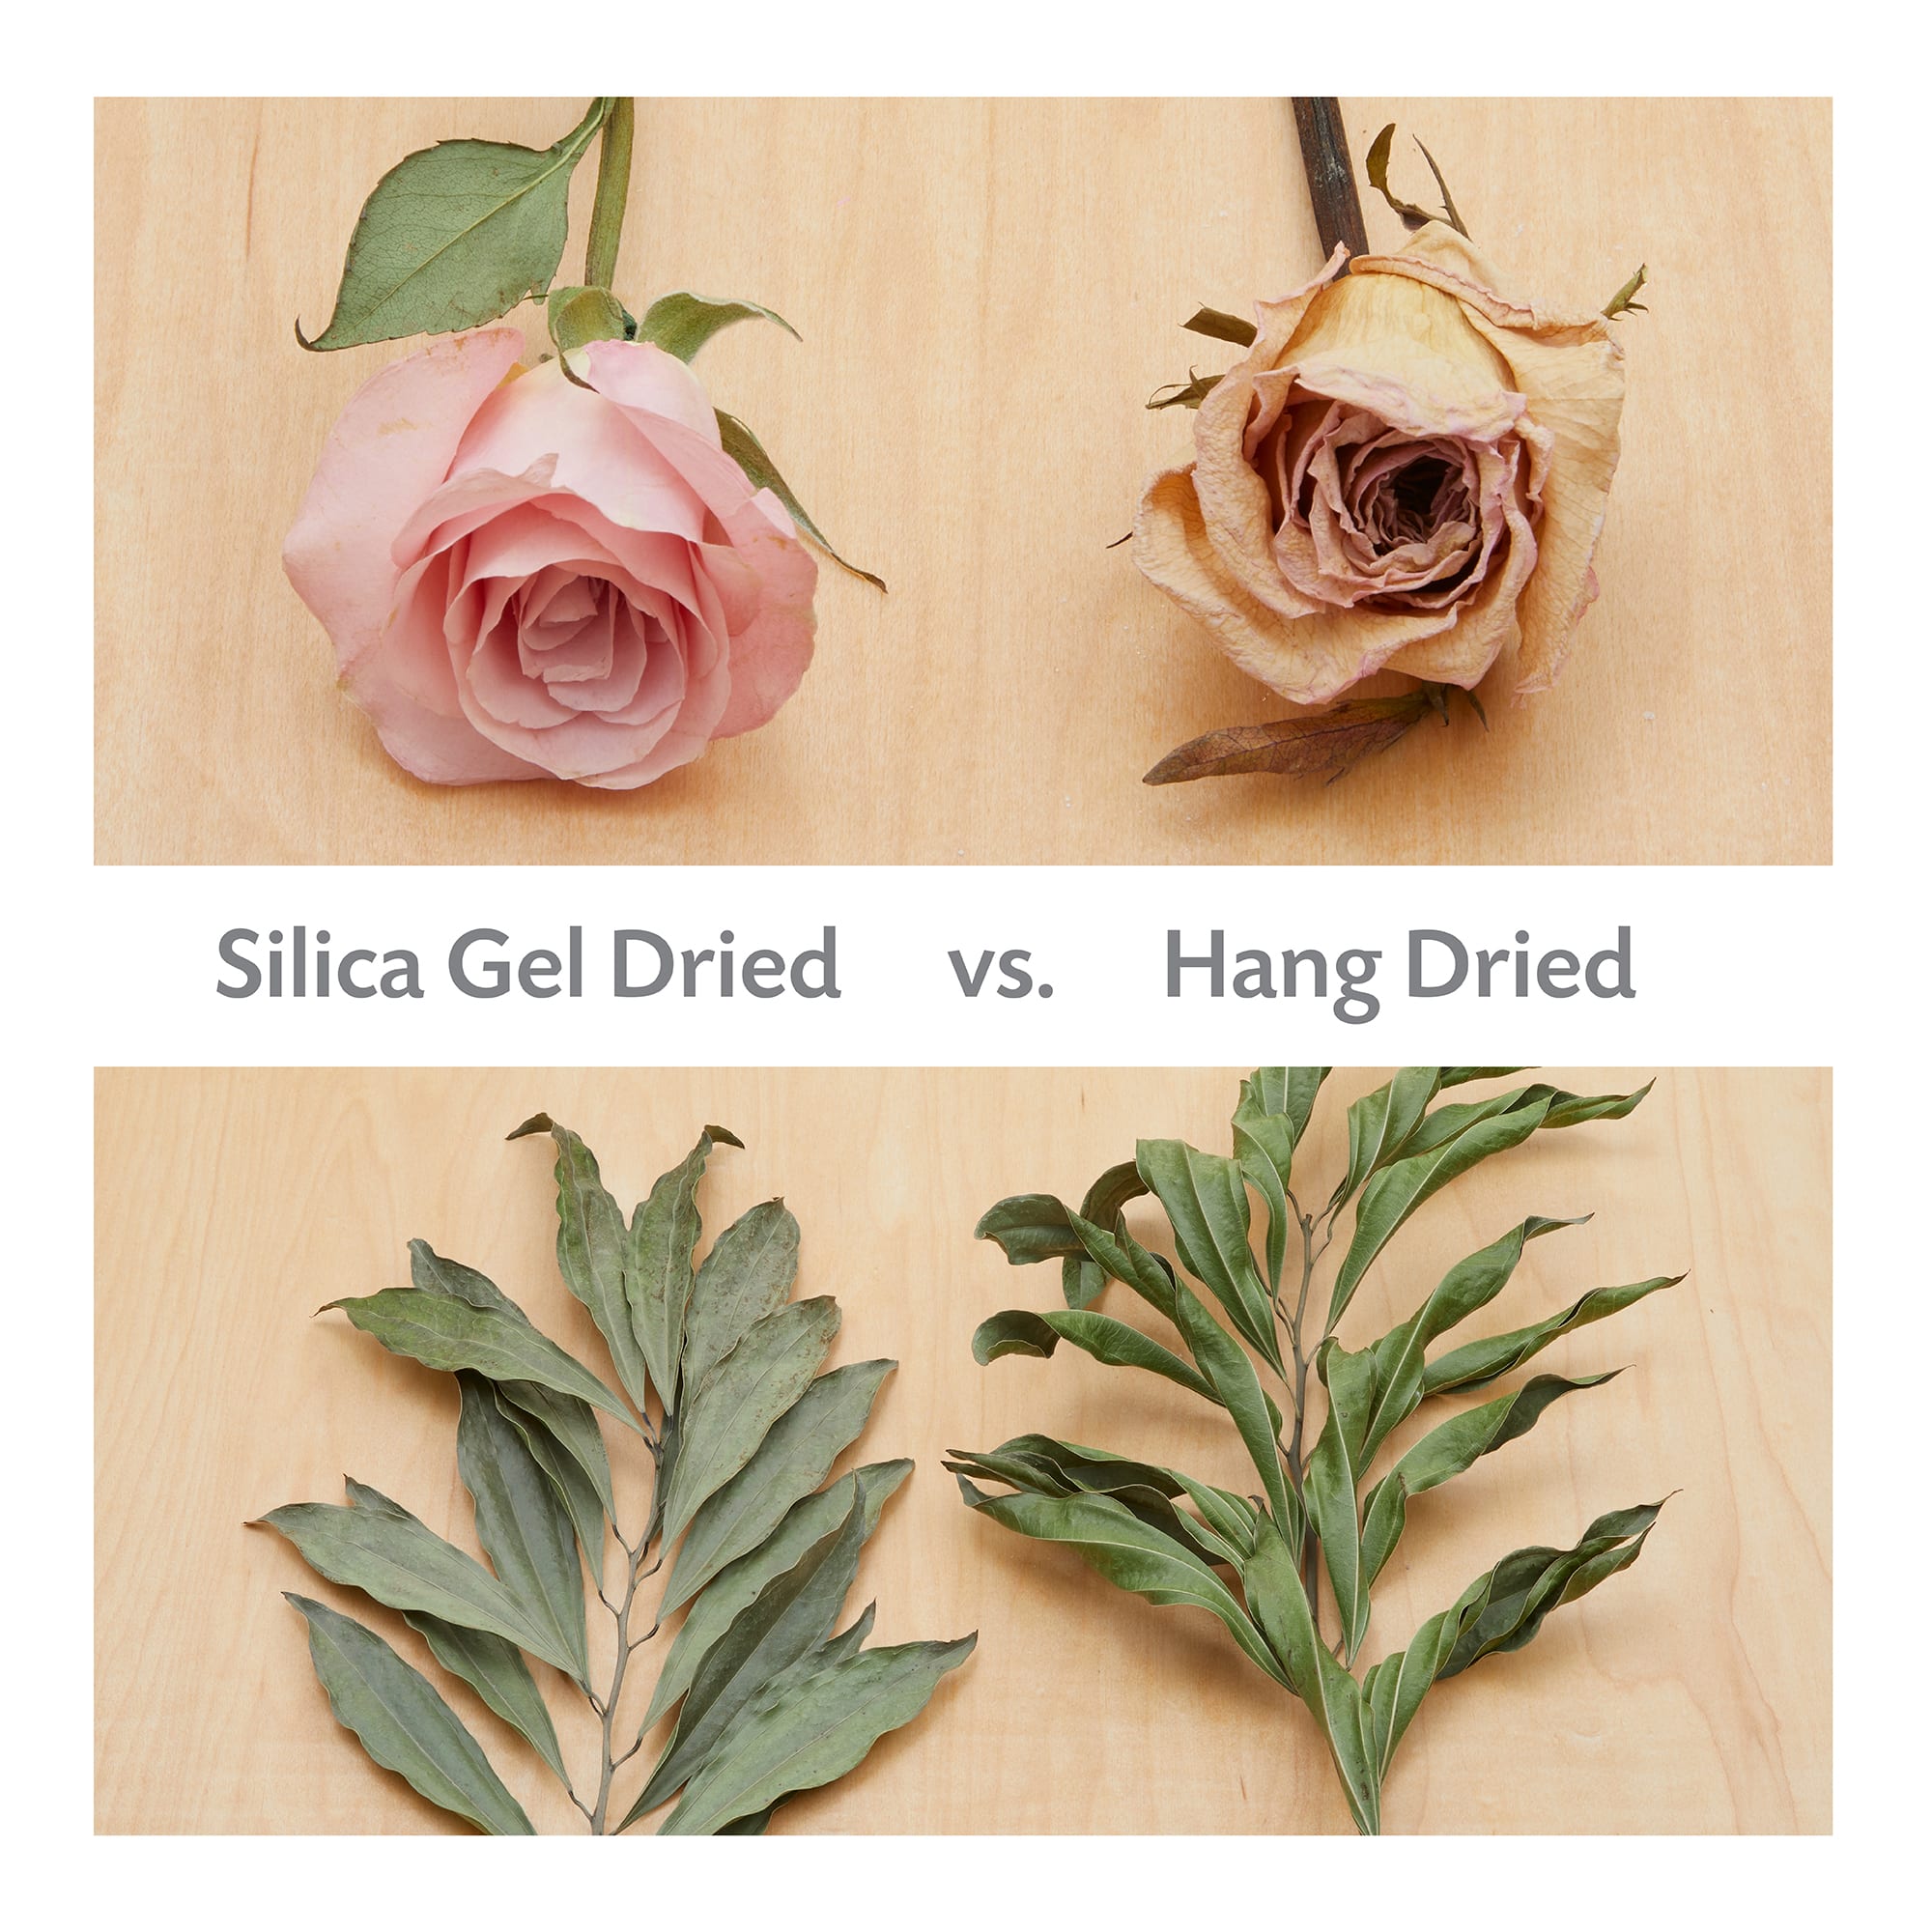 is there any difference between flower silica and regular silica